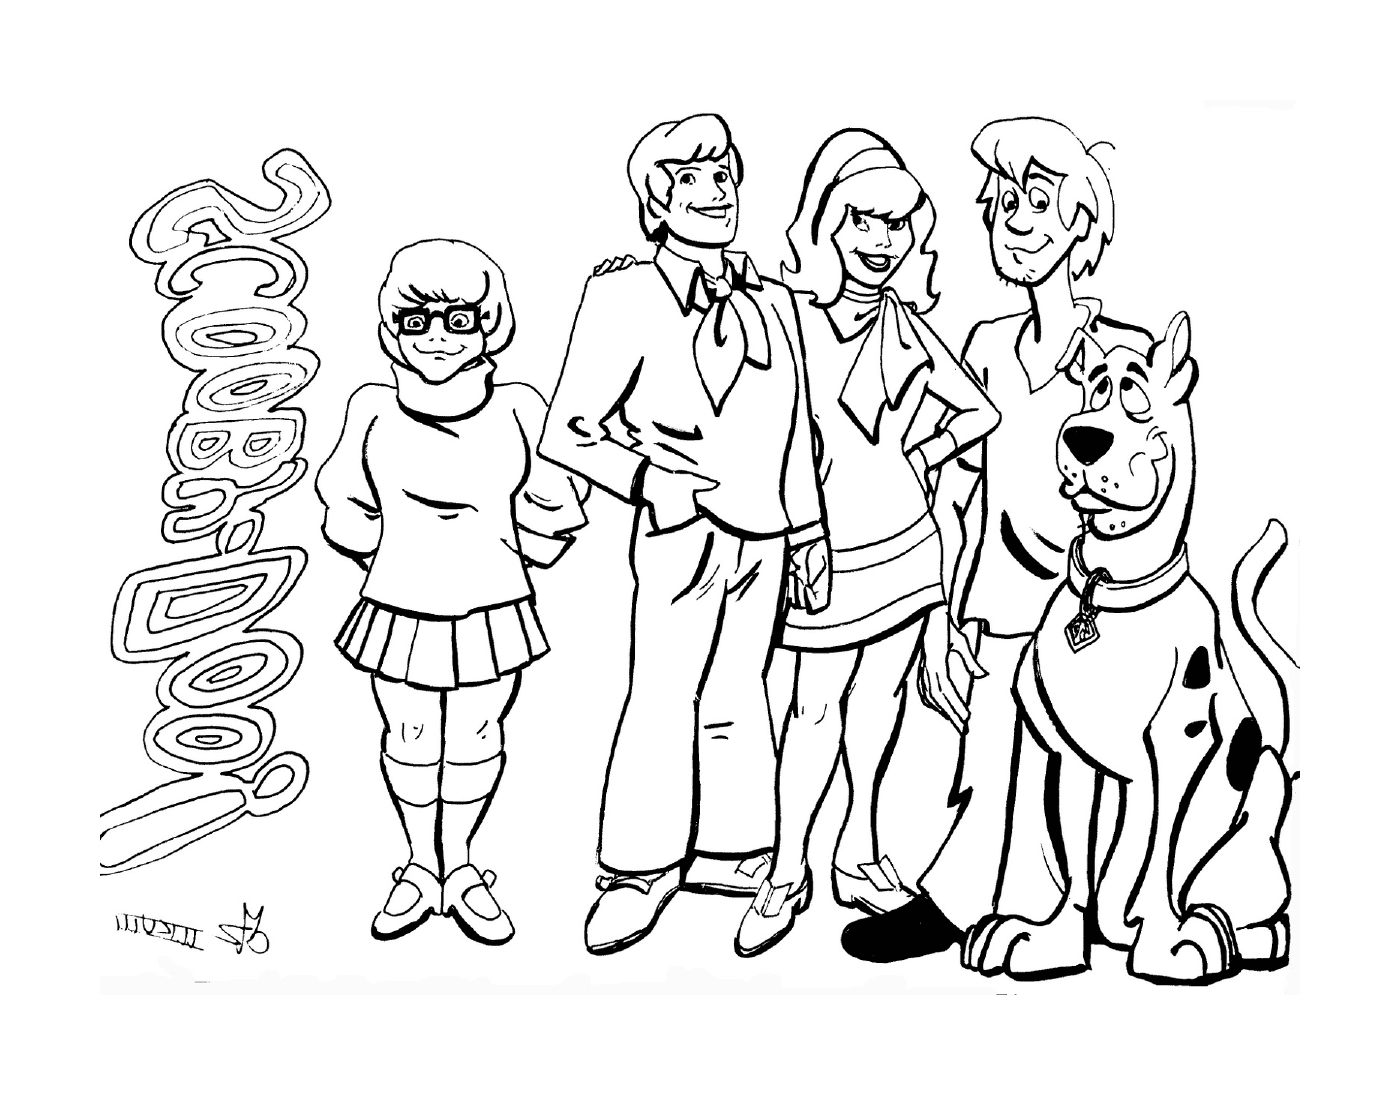  Scooby-Doo and his friends 